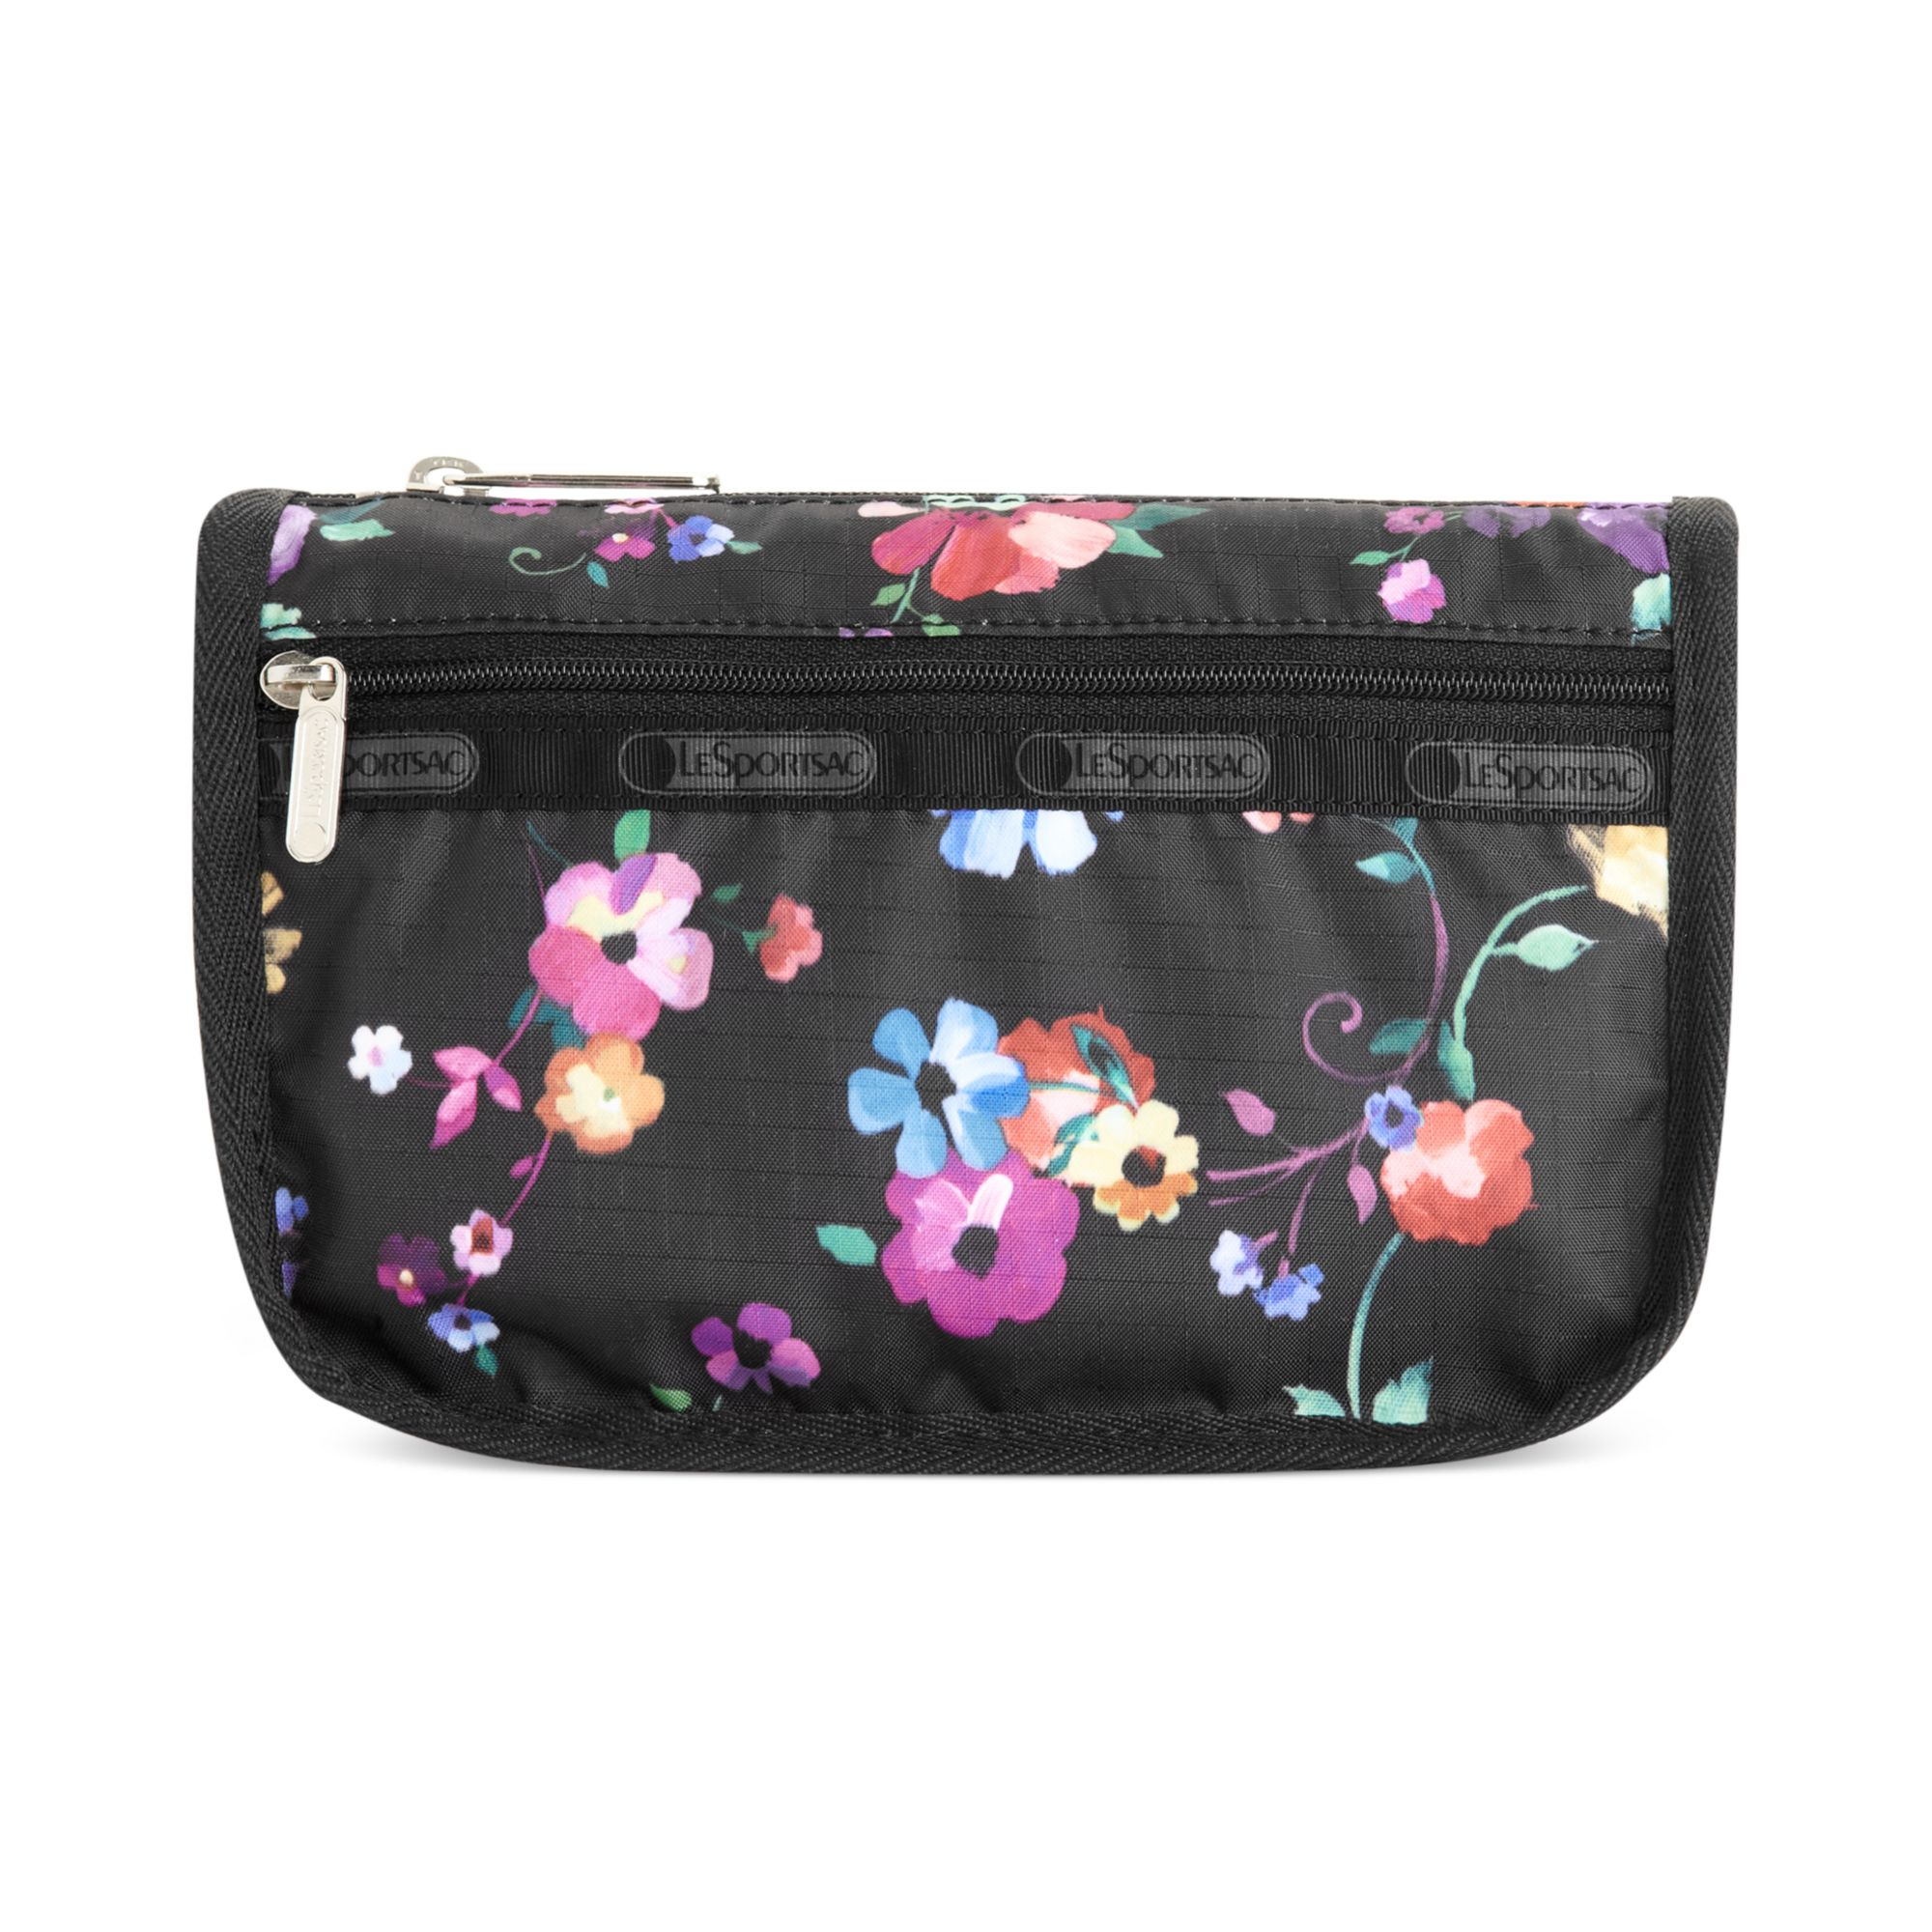 Lesportsac Printed Travel Cosmetic Bag in Black (Impressionist Flower ...